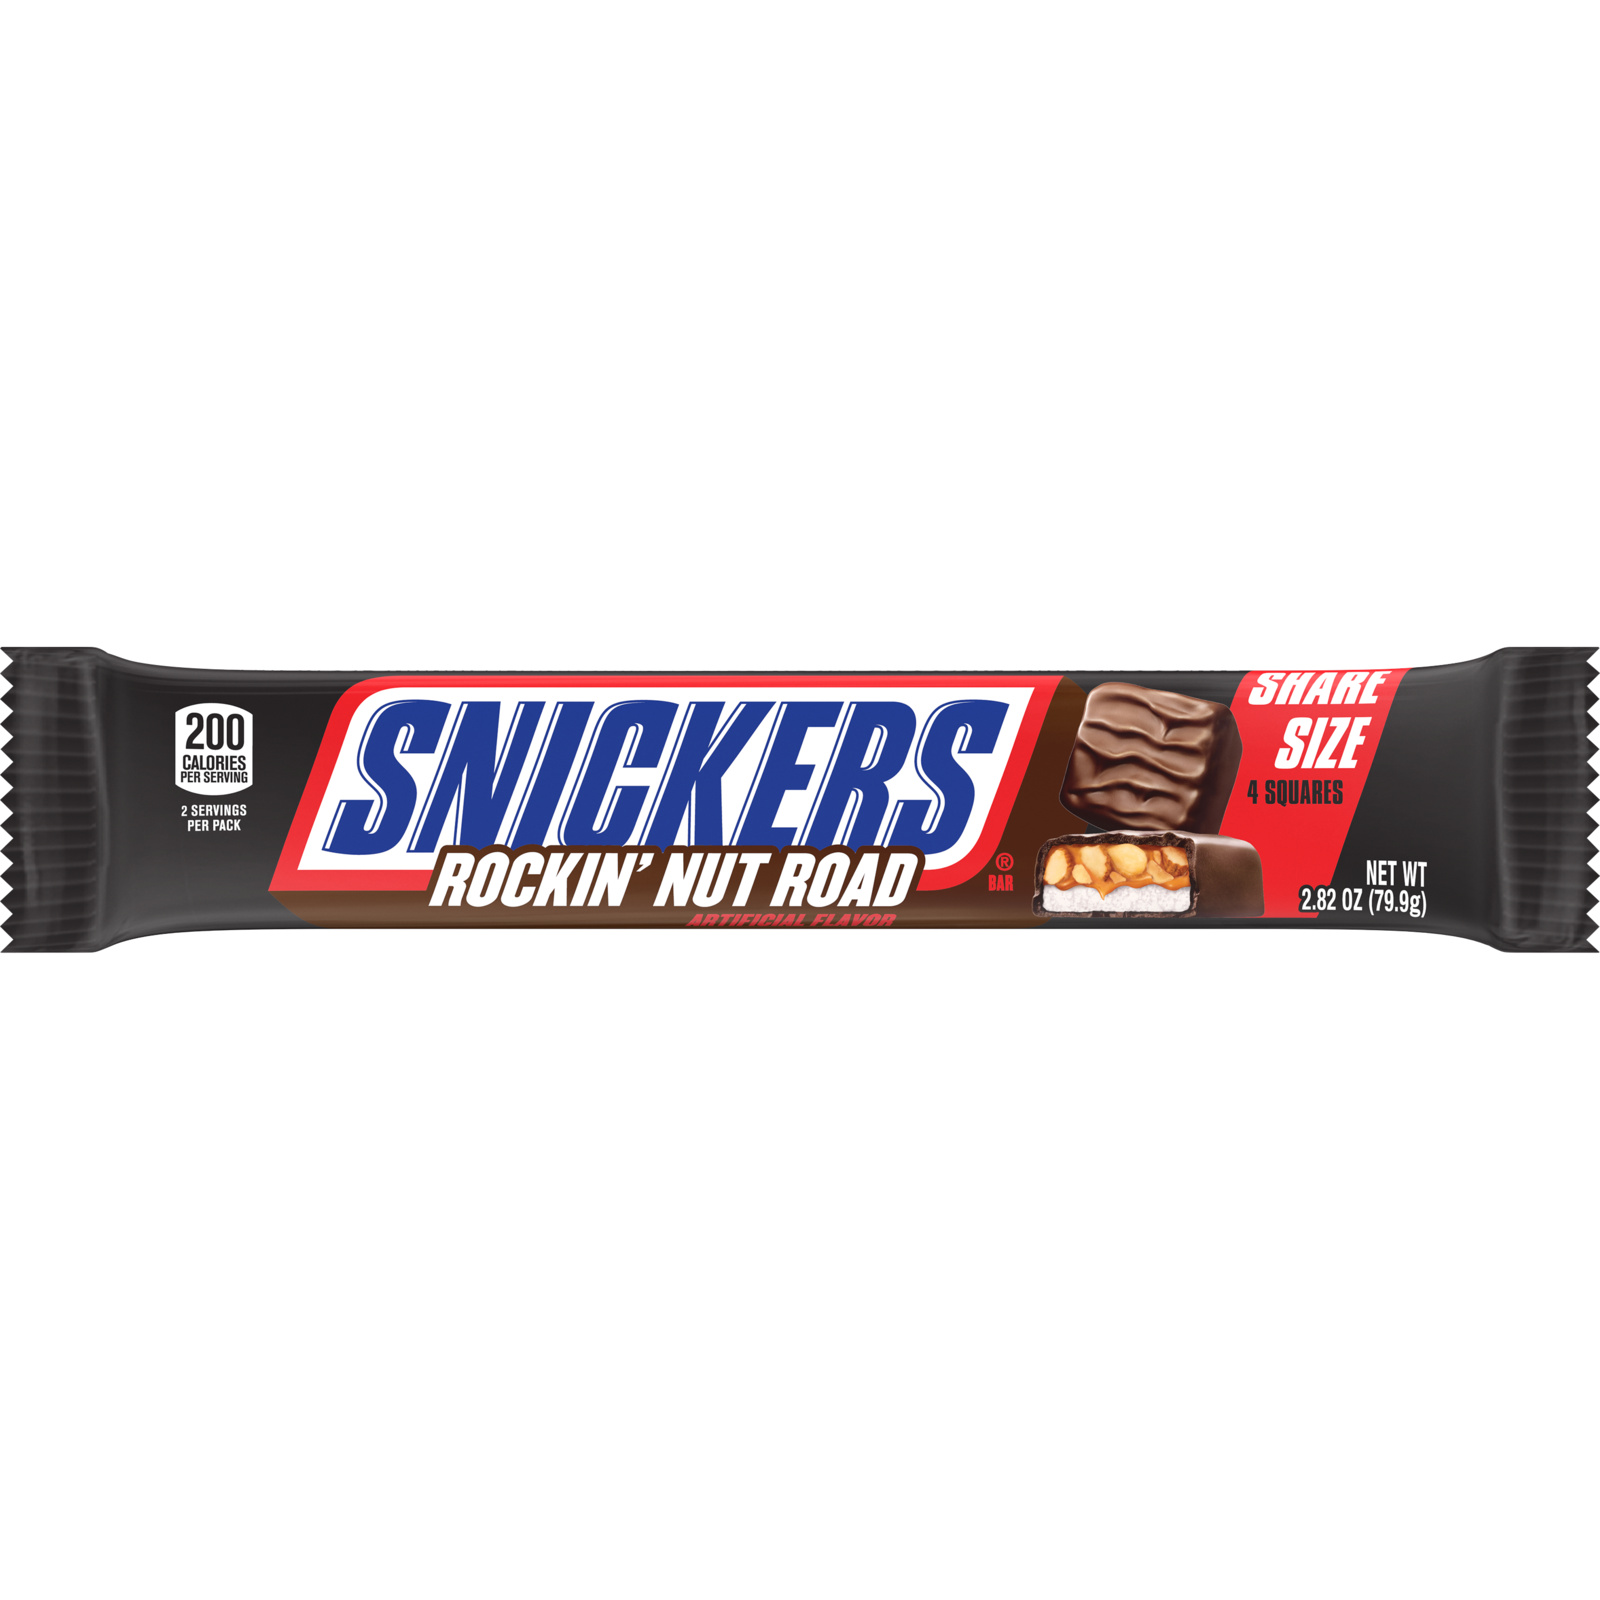 Snickers Rockin Nut Road Share Size - The George J. Falter Co. Inc.